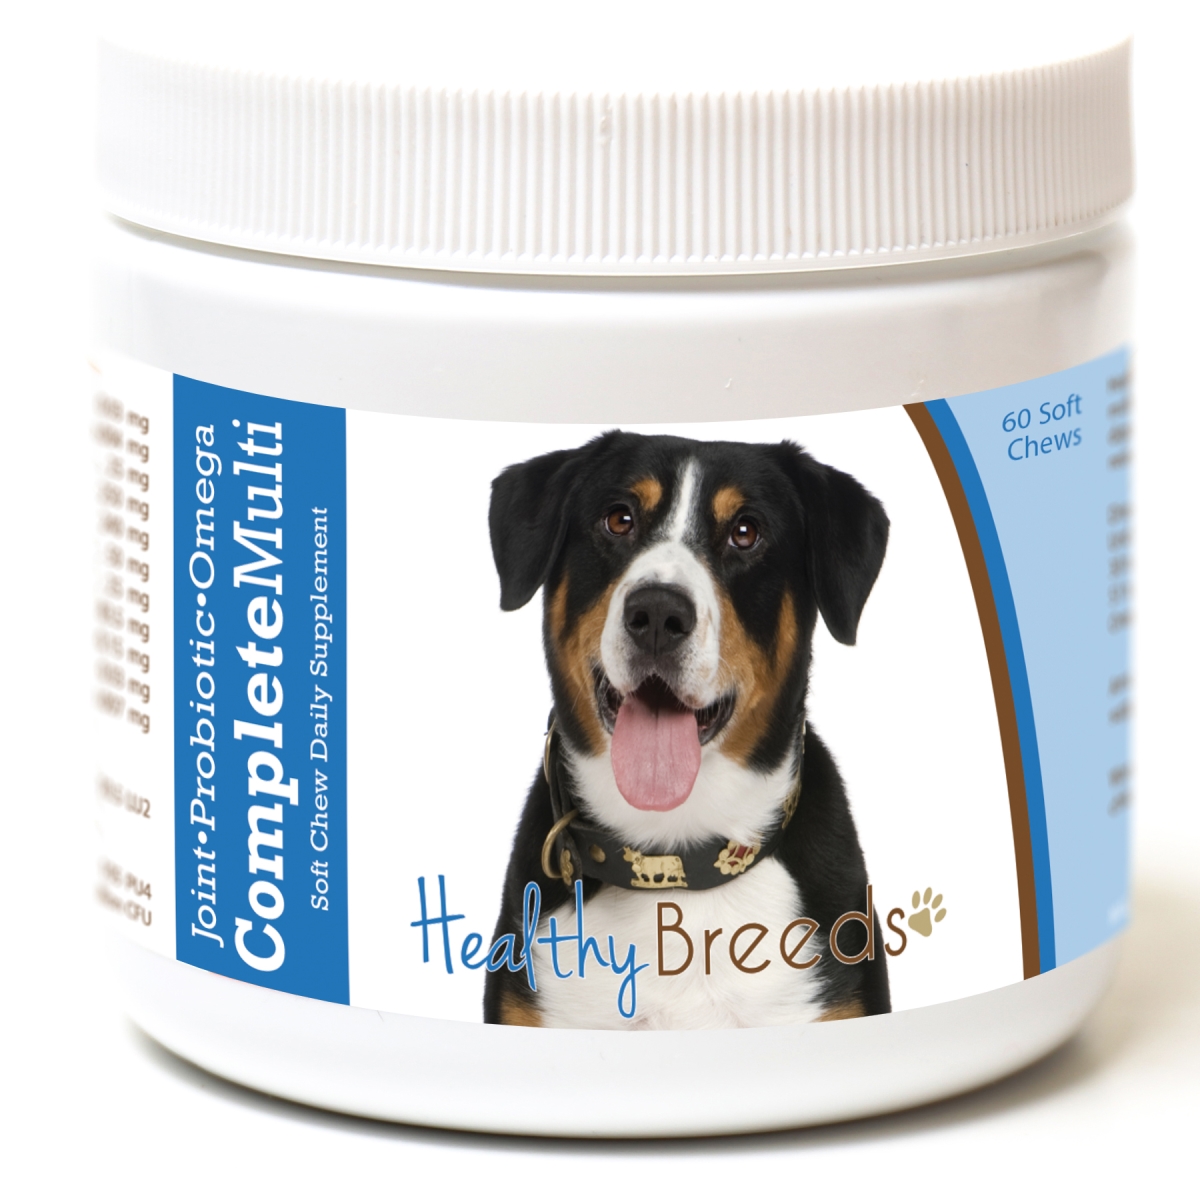 Picture of Healthy Breeds 192959007954 Entlebucher Mountain Dog All in One Multivitamin Soft Chew - 60 Count